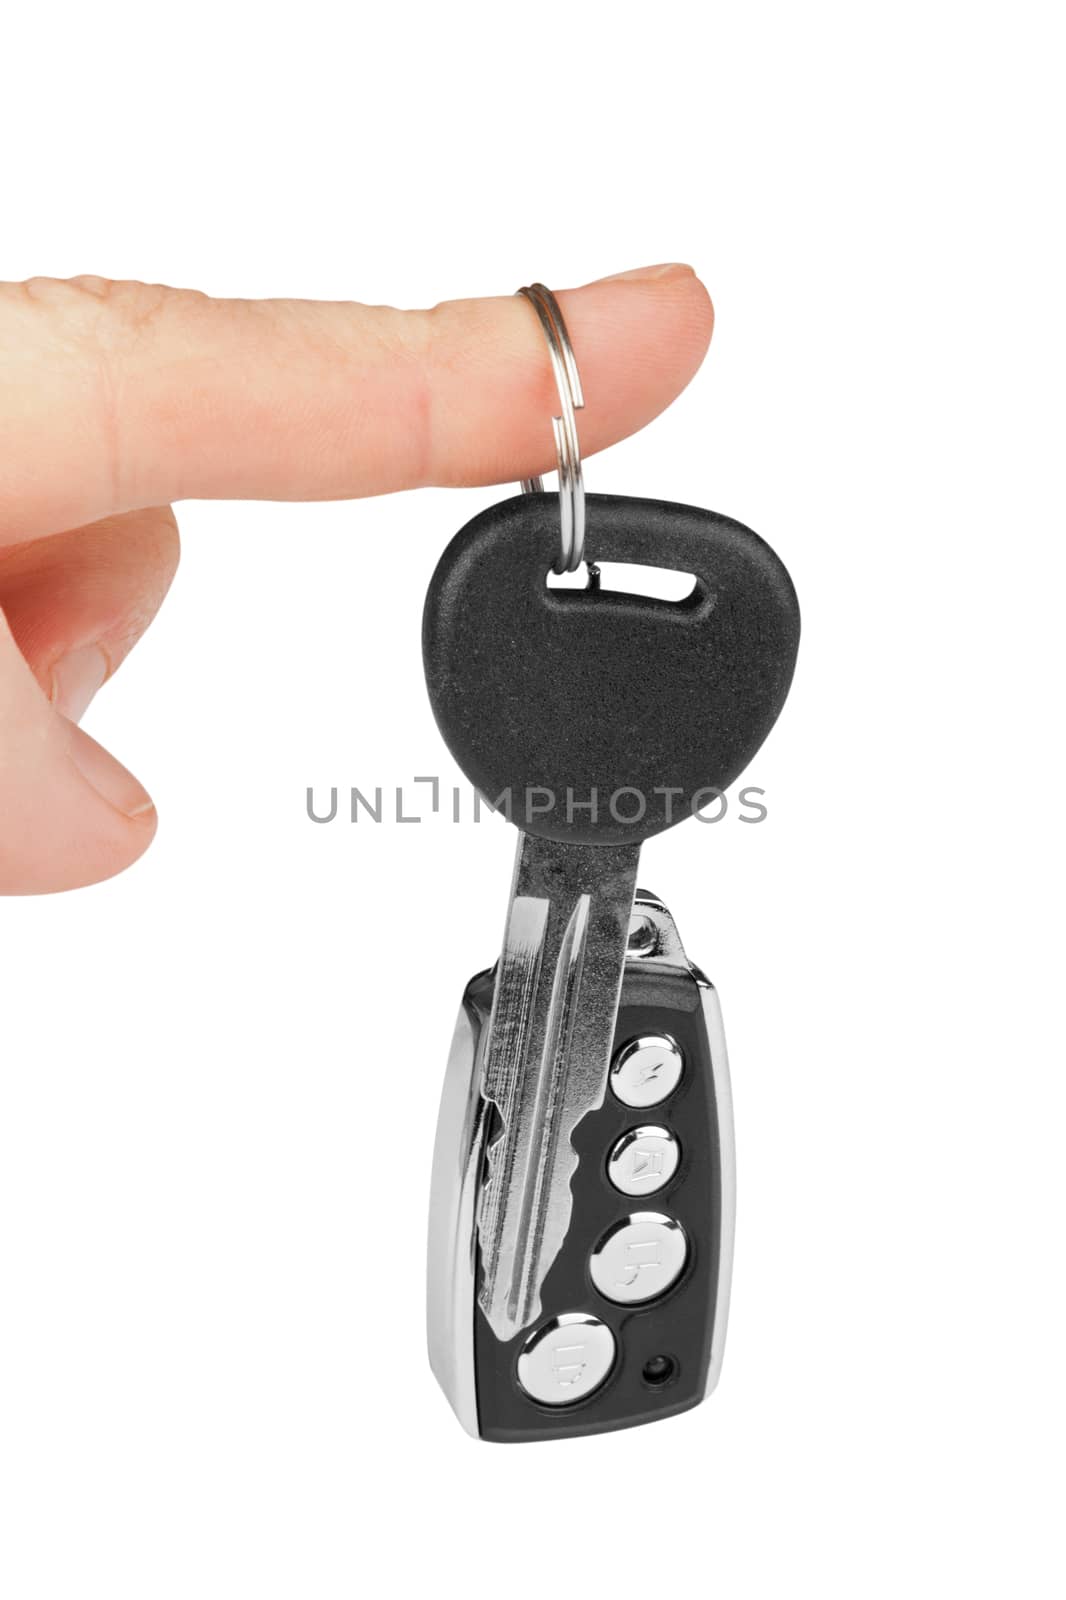 car key with alarm in finger isolated